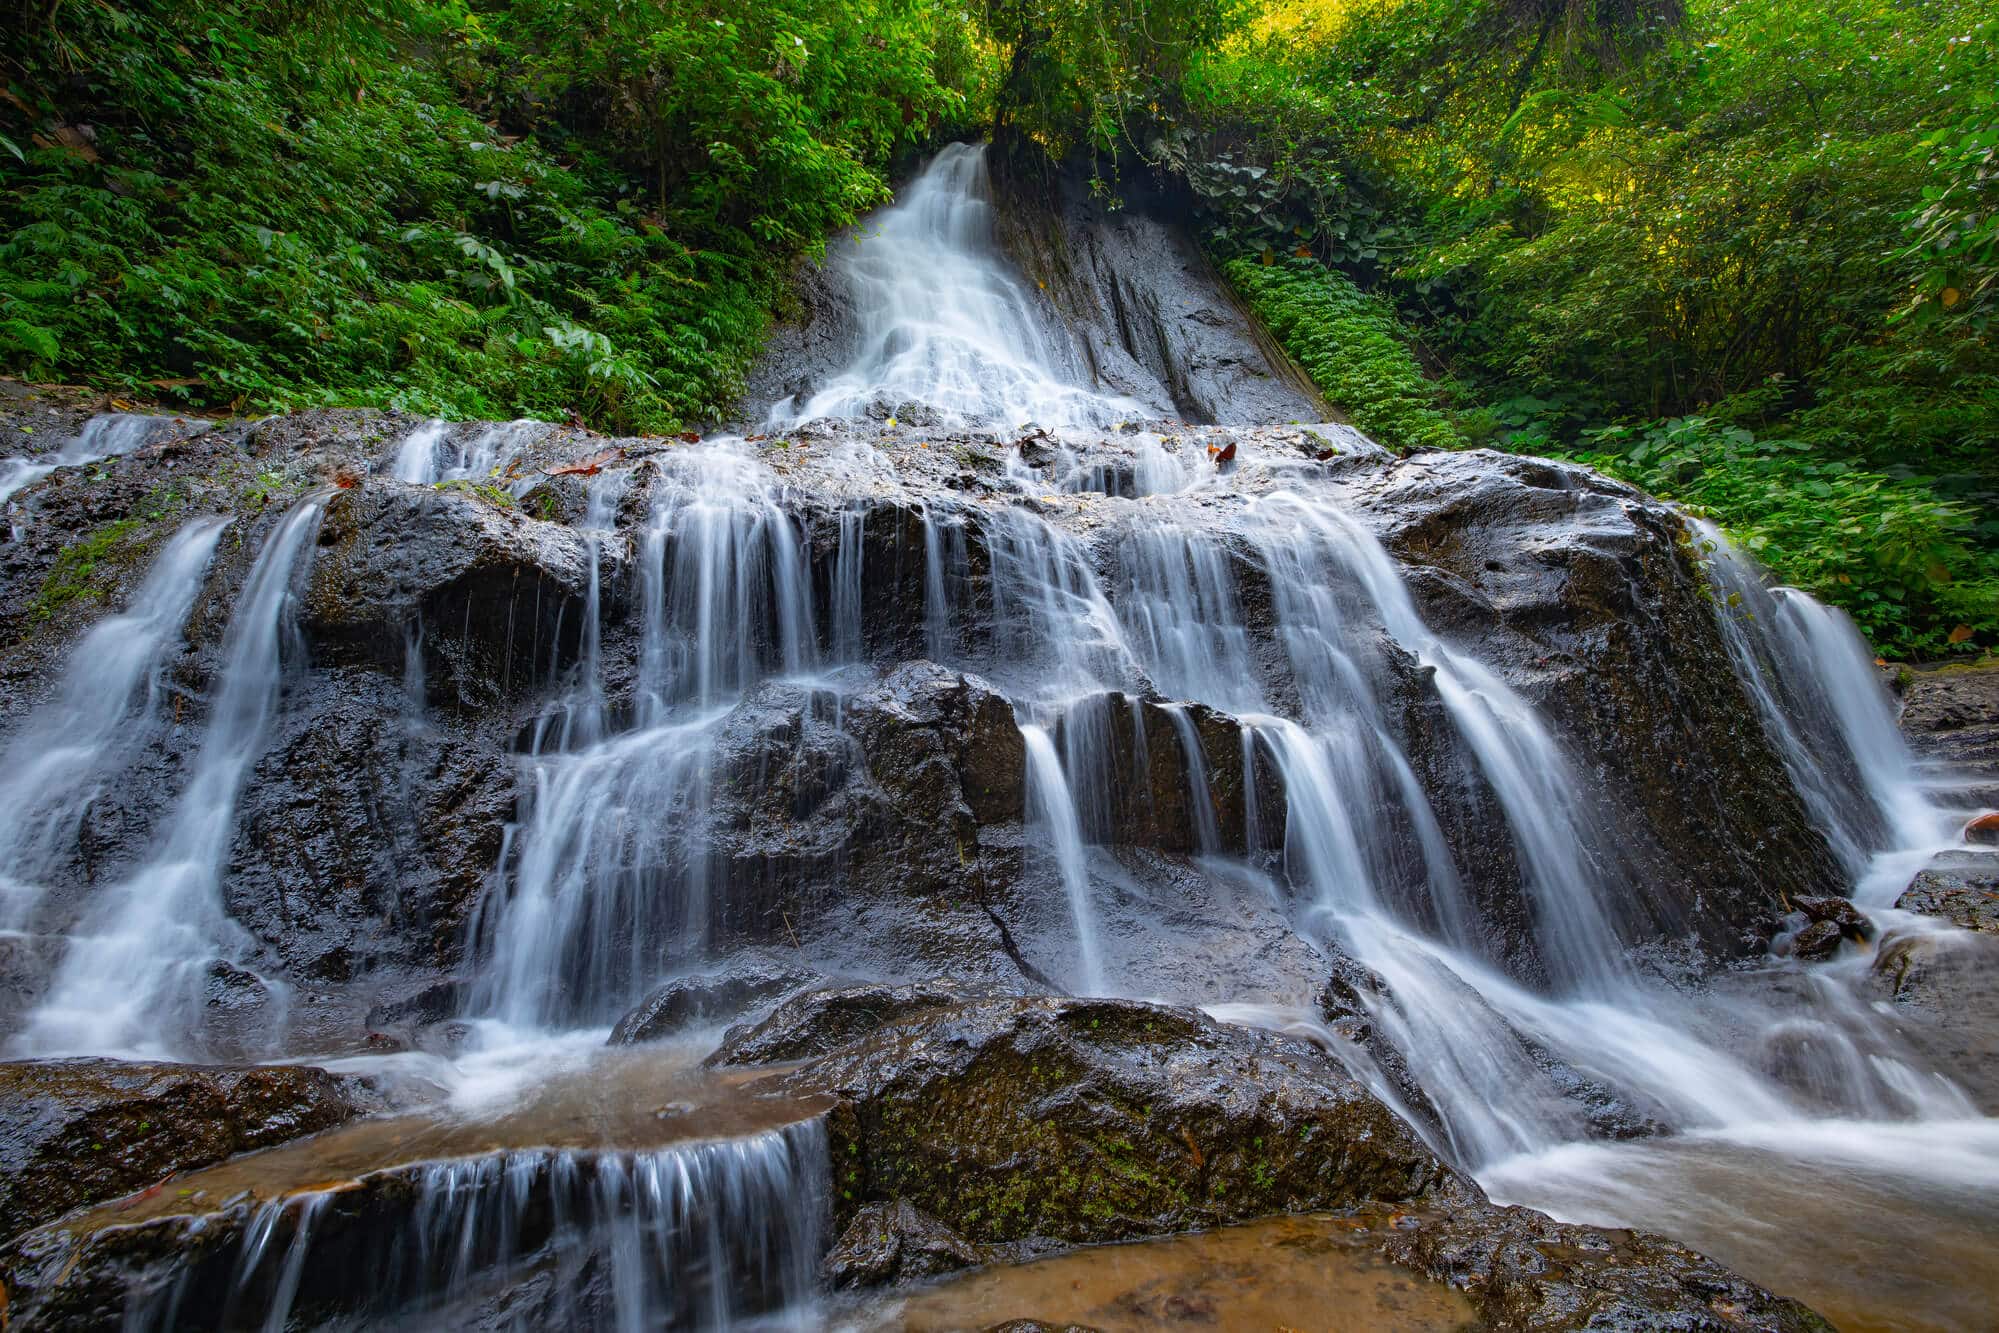 A guide to all the best waterfalls in Ubud Bali - Goa Giri Campuhan Waterfall, also known as GGC